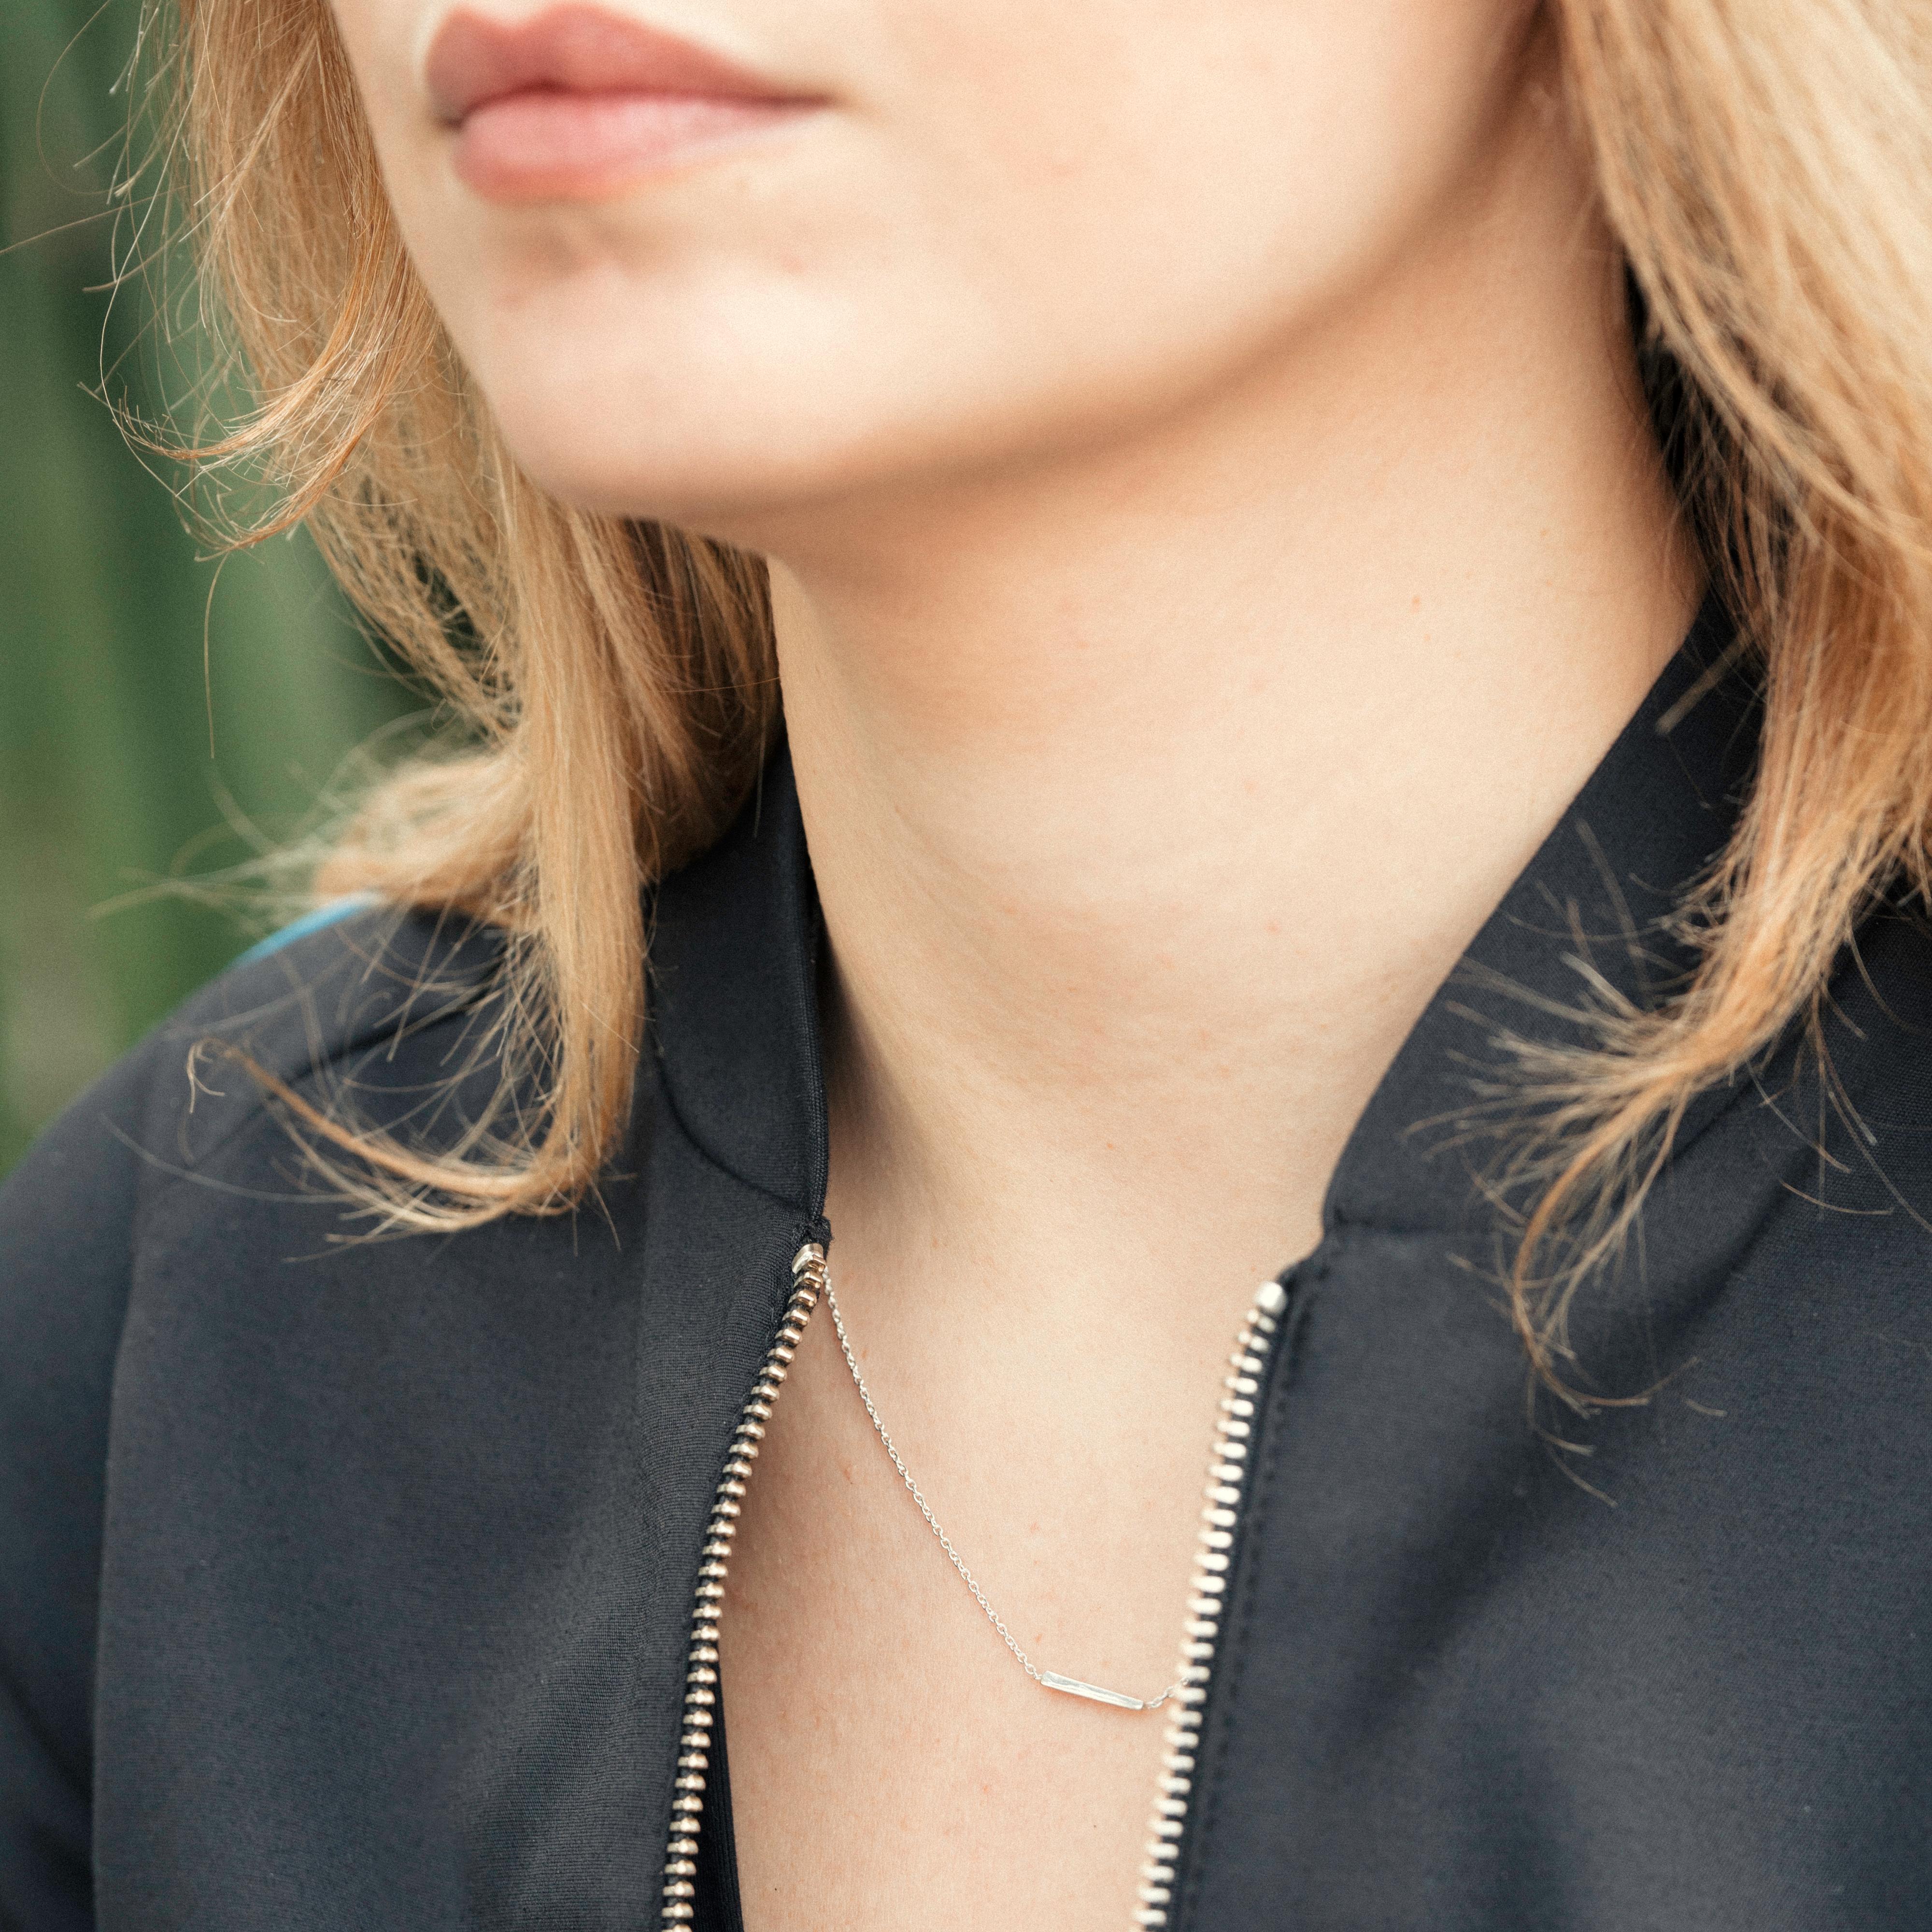 The Interval Bar Necklace shifts from square to triangle end to end. Dynamic and easy, this necklace is a study in subtle motion. A delicate but sturdy 16”/ 1 mm Italian chain makes this piece durable for everyday wear. Crafted in solid sterling